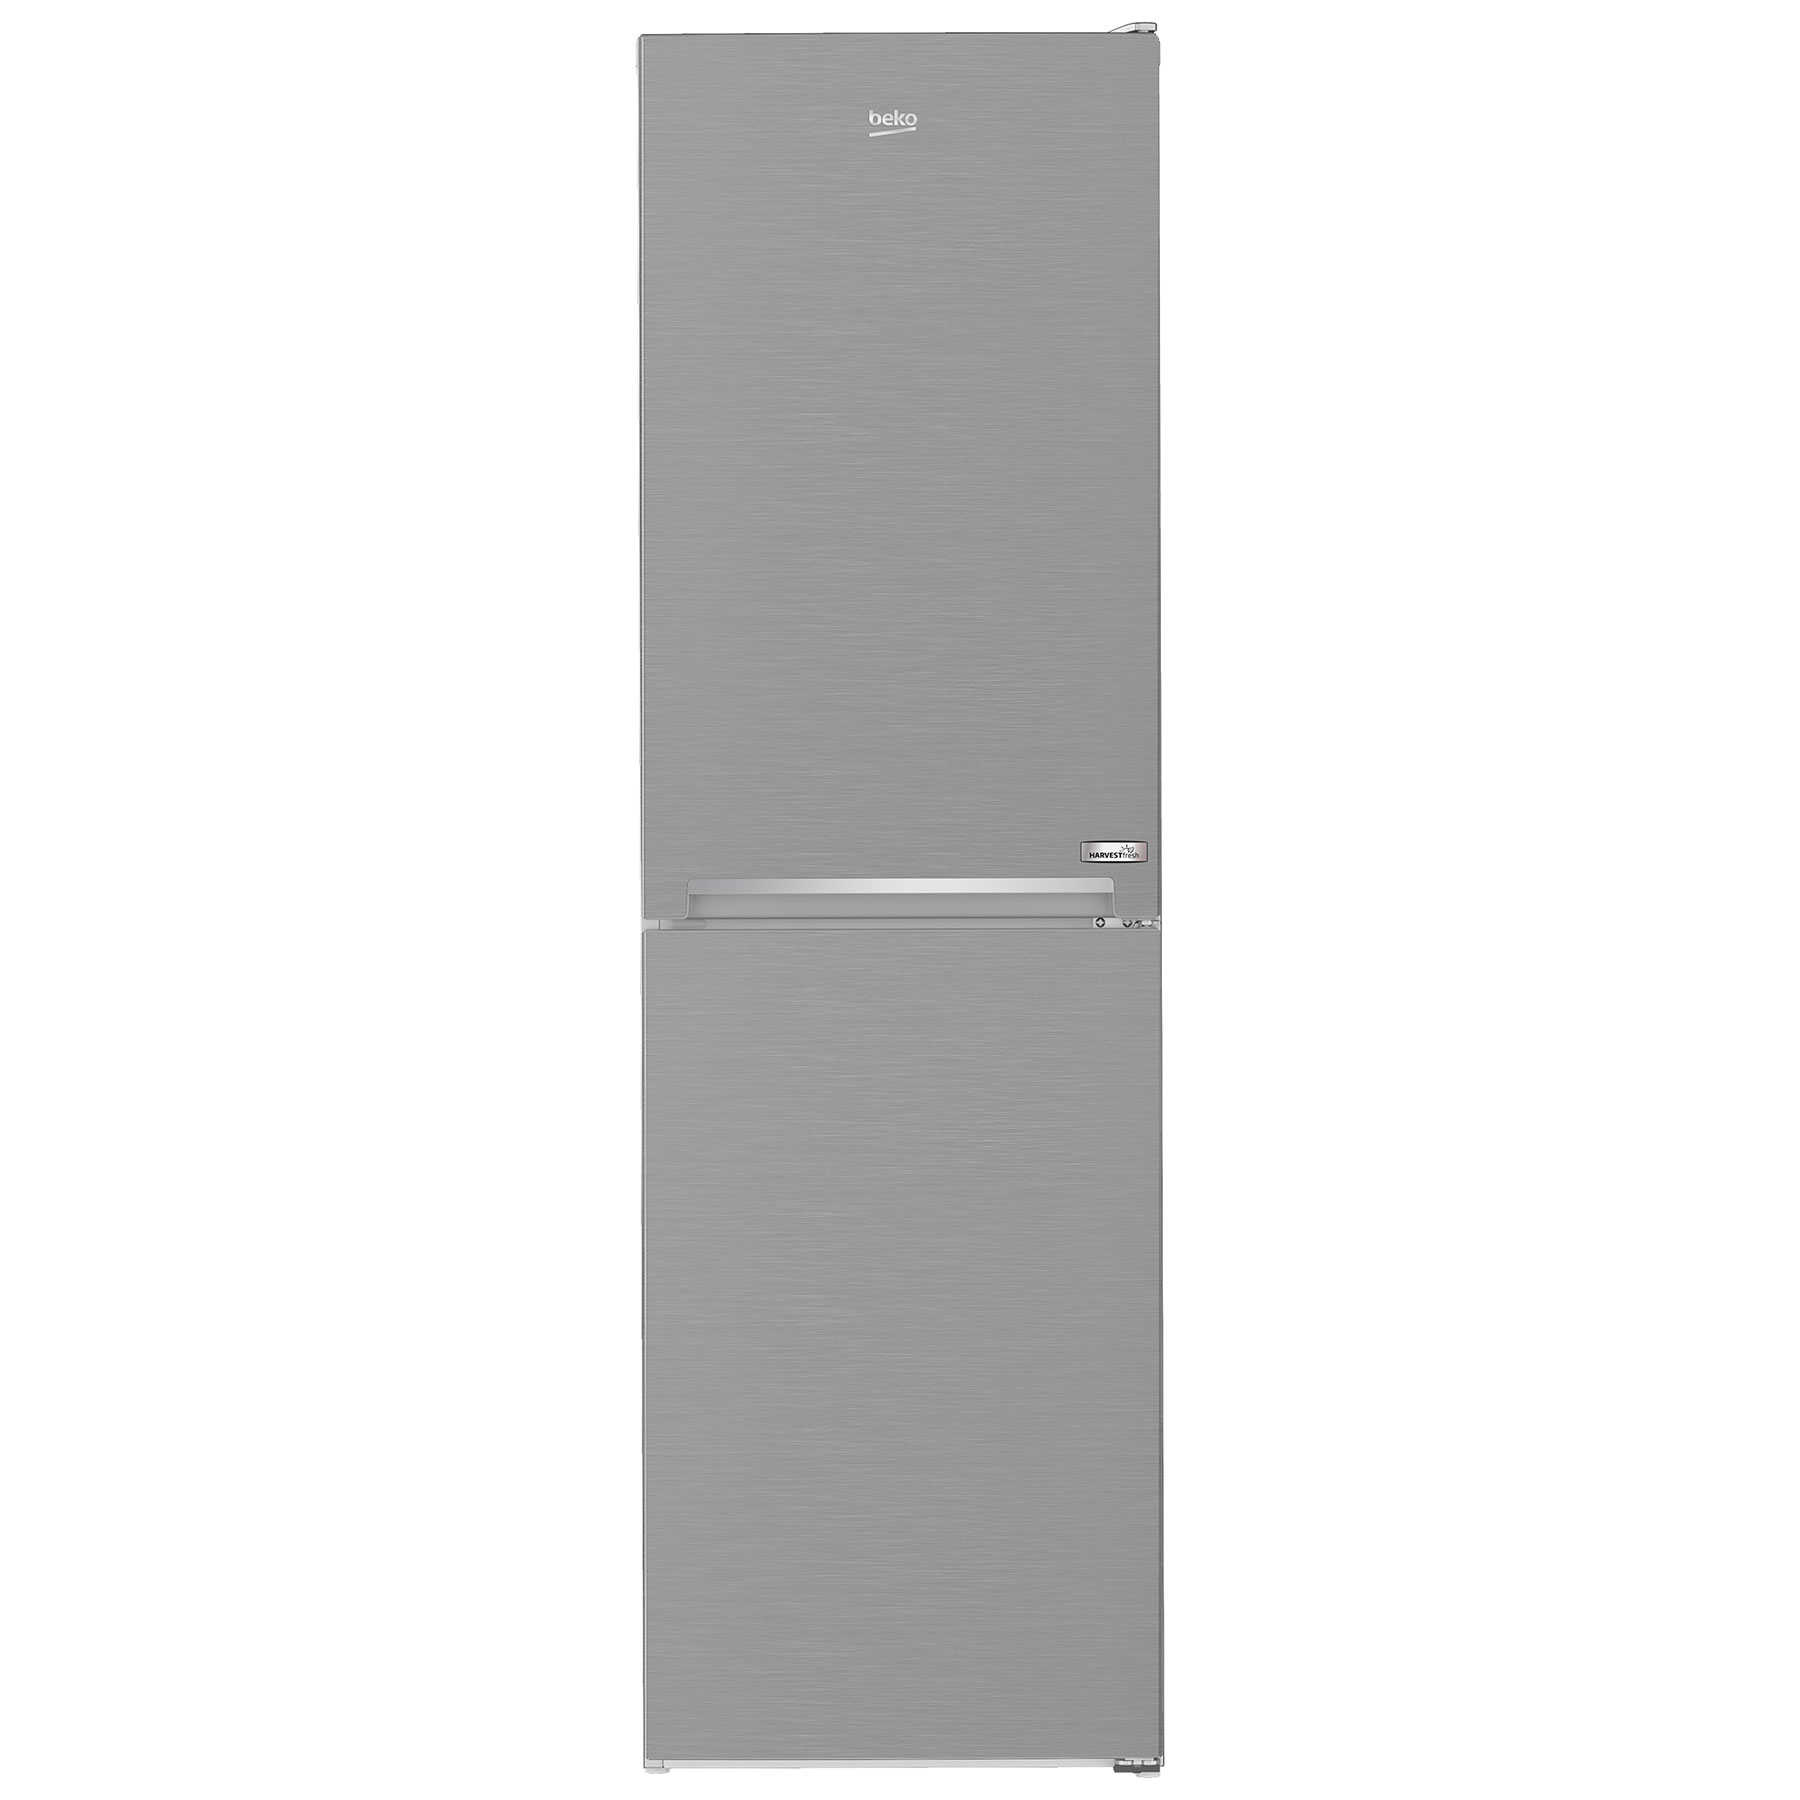 Beko CNG3582VPS 55cm Frost Free Fridge Freezer in St St 1 82m F Rated